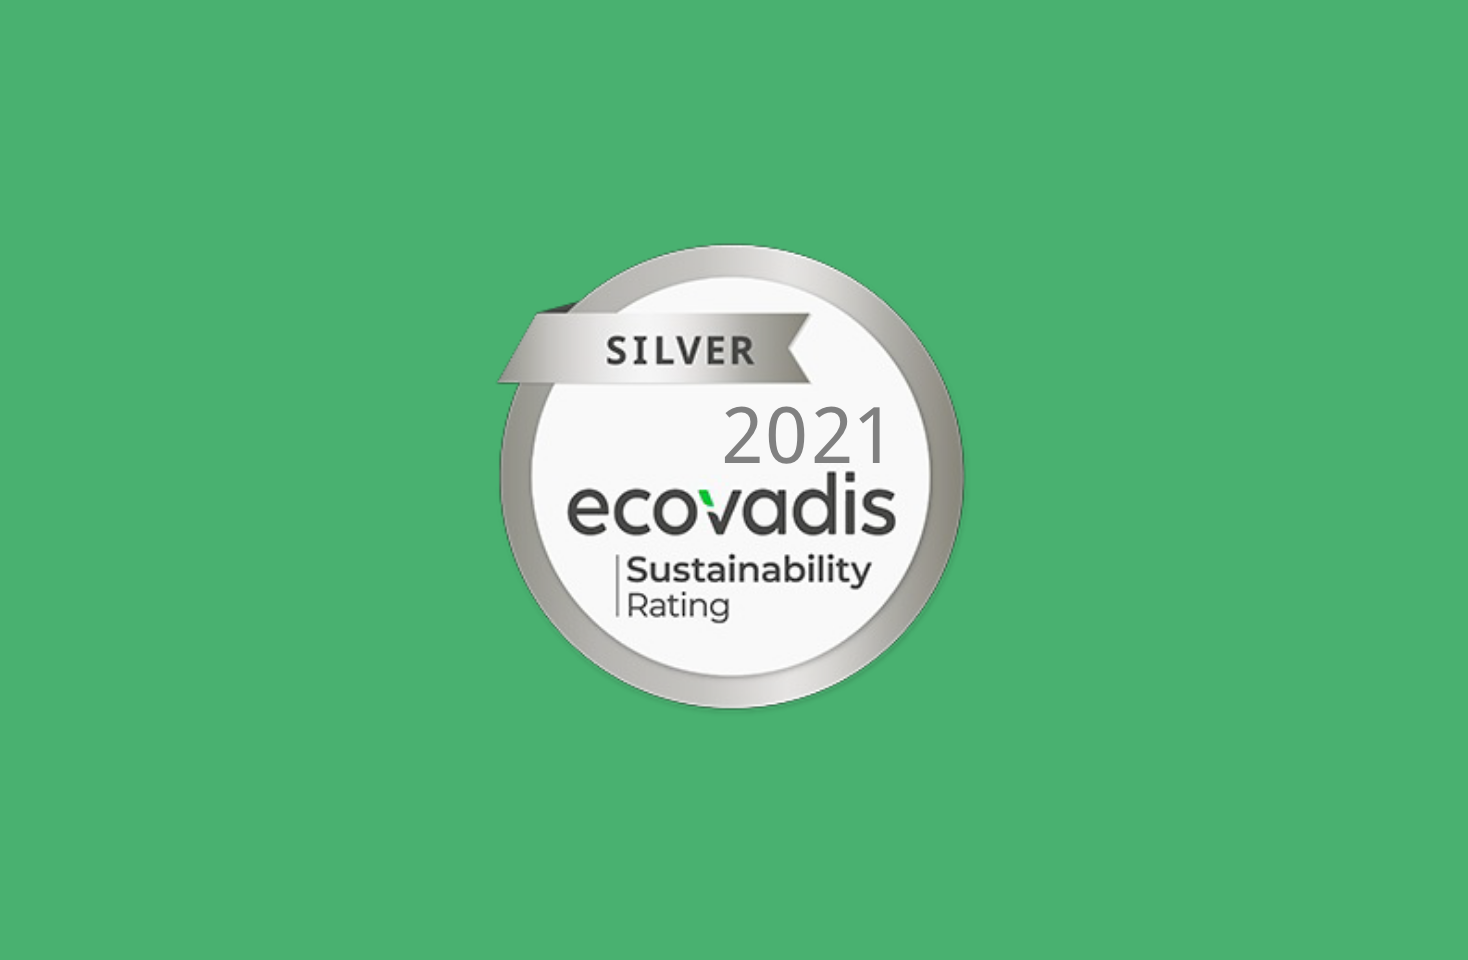 Image of MCC receives silver medal in recognition of our EcoVadis Rating